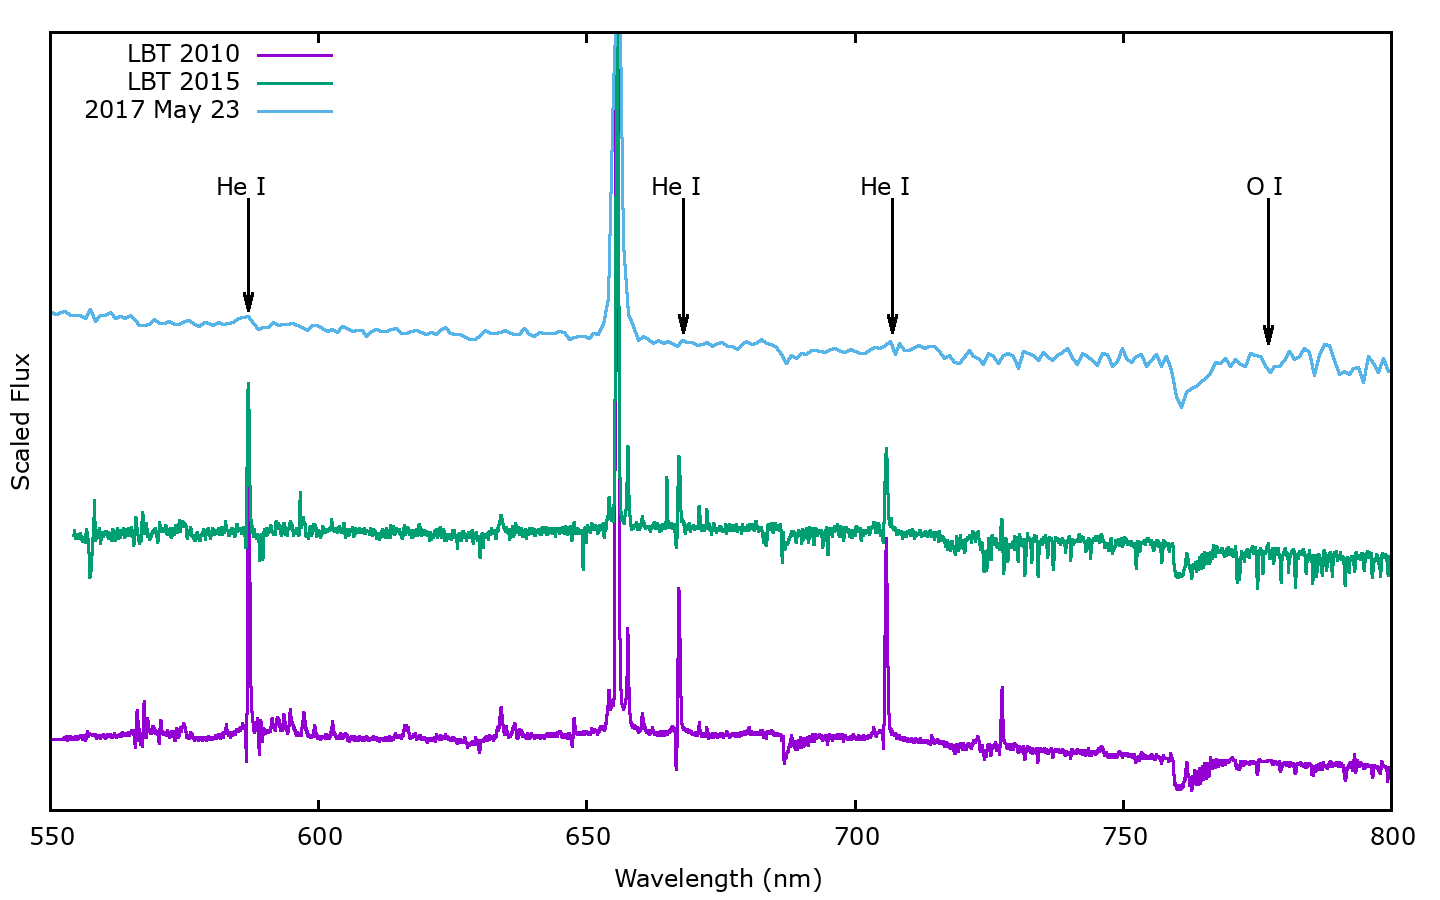 Comparison of May 2017 spectrum with earlier LBT spectra from 2010 and 2015